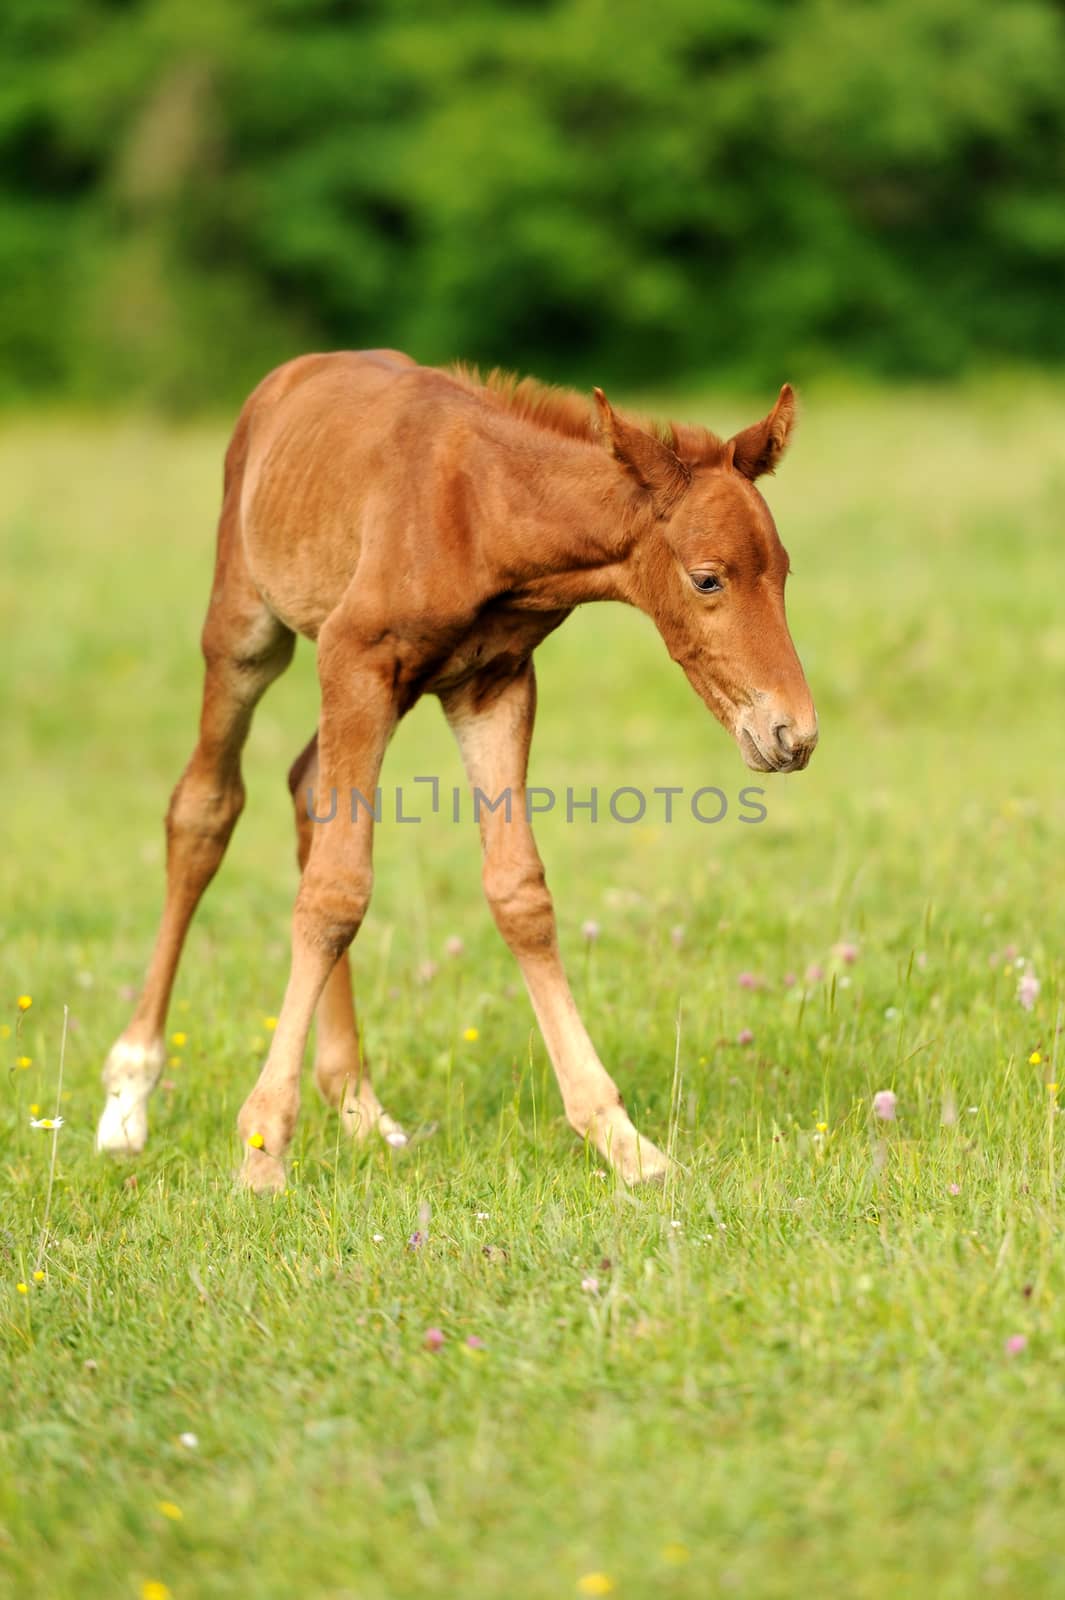 Baby horse in grass